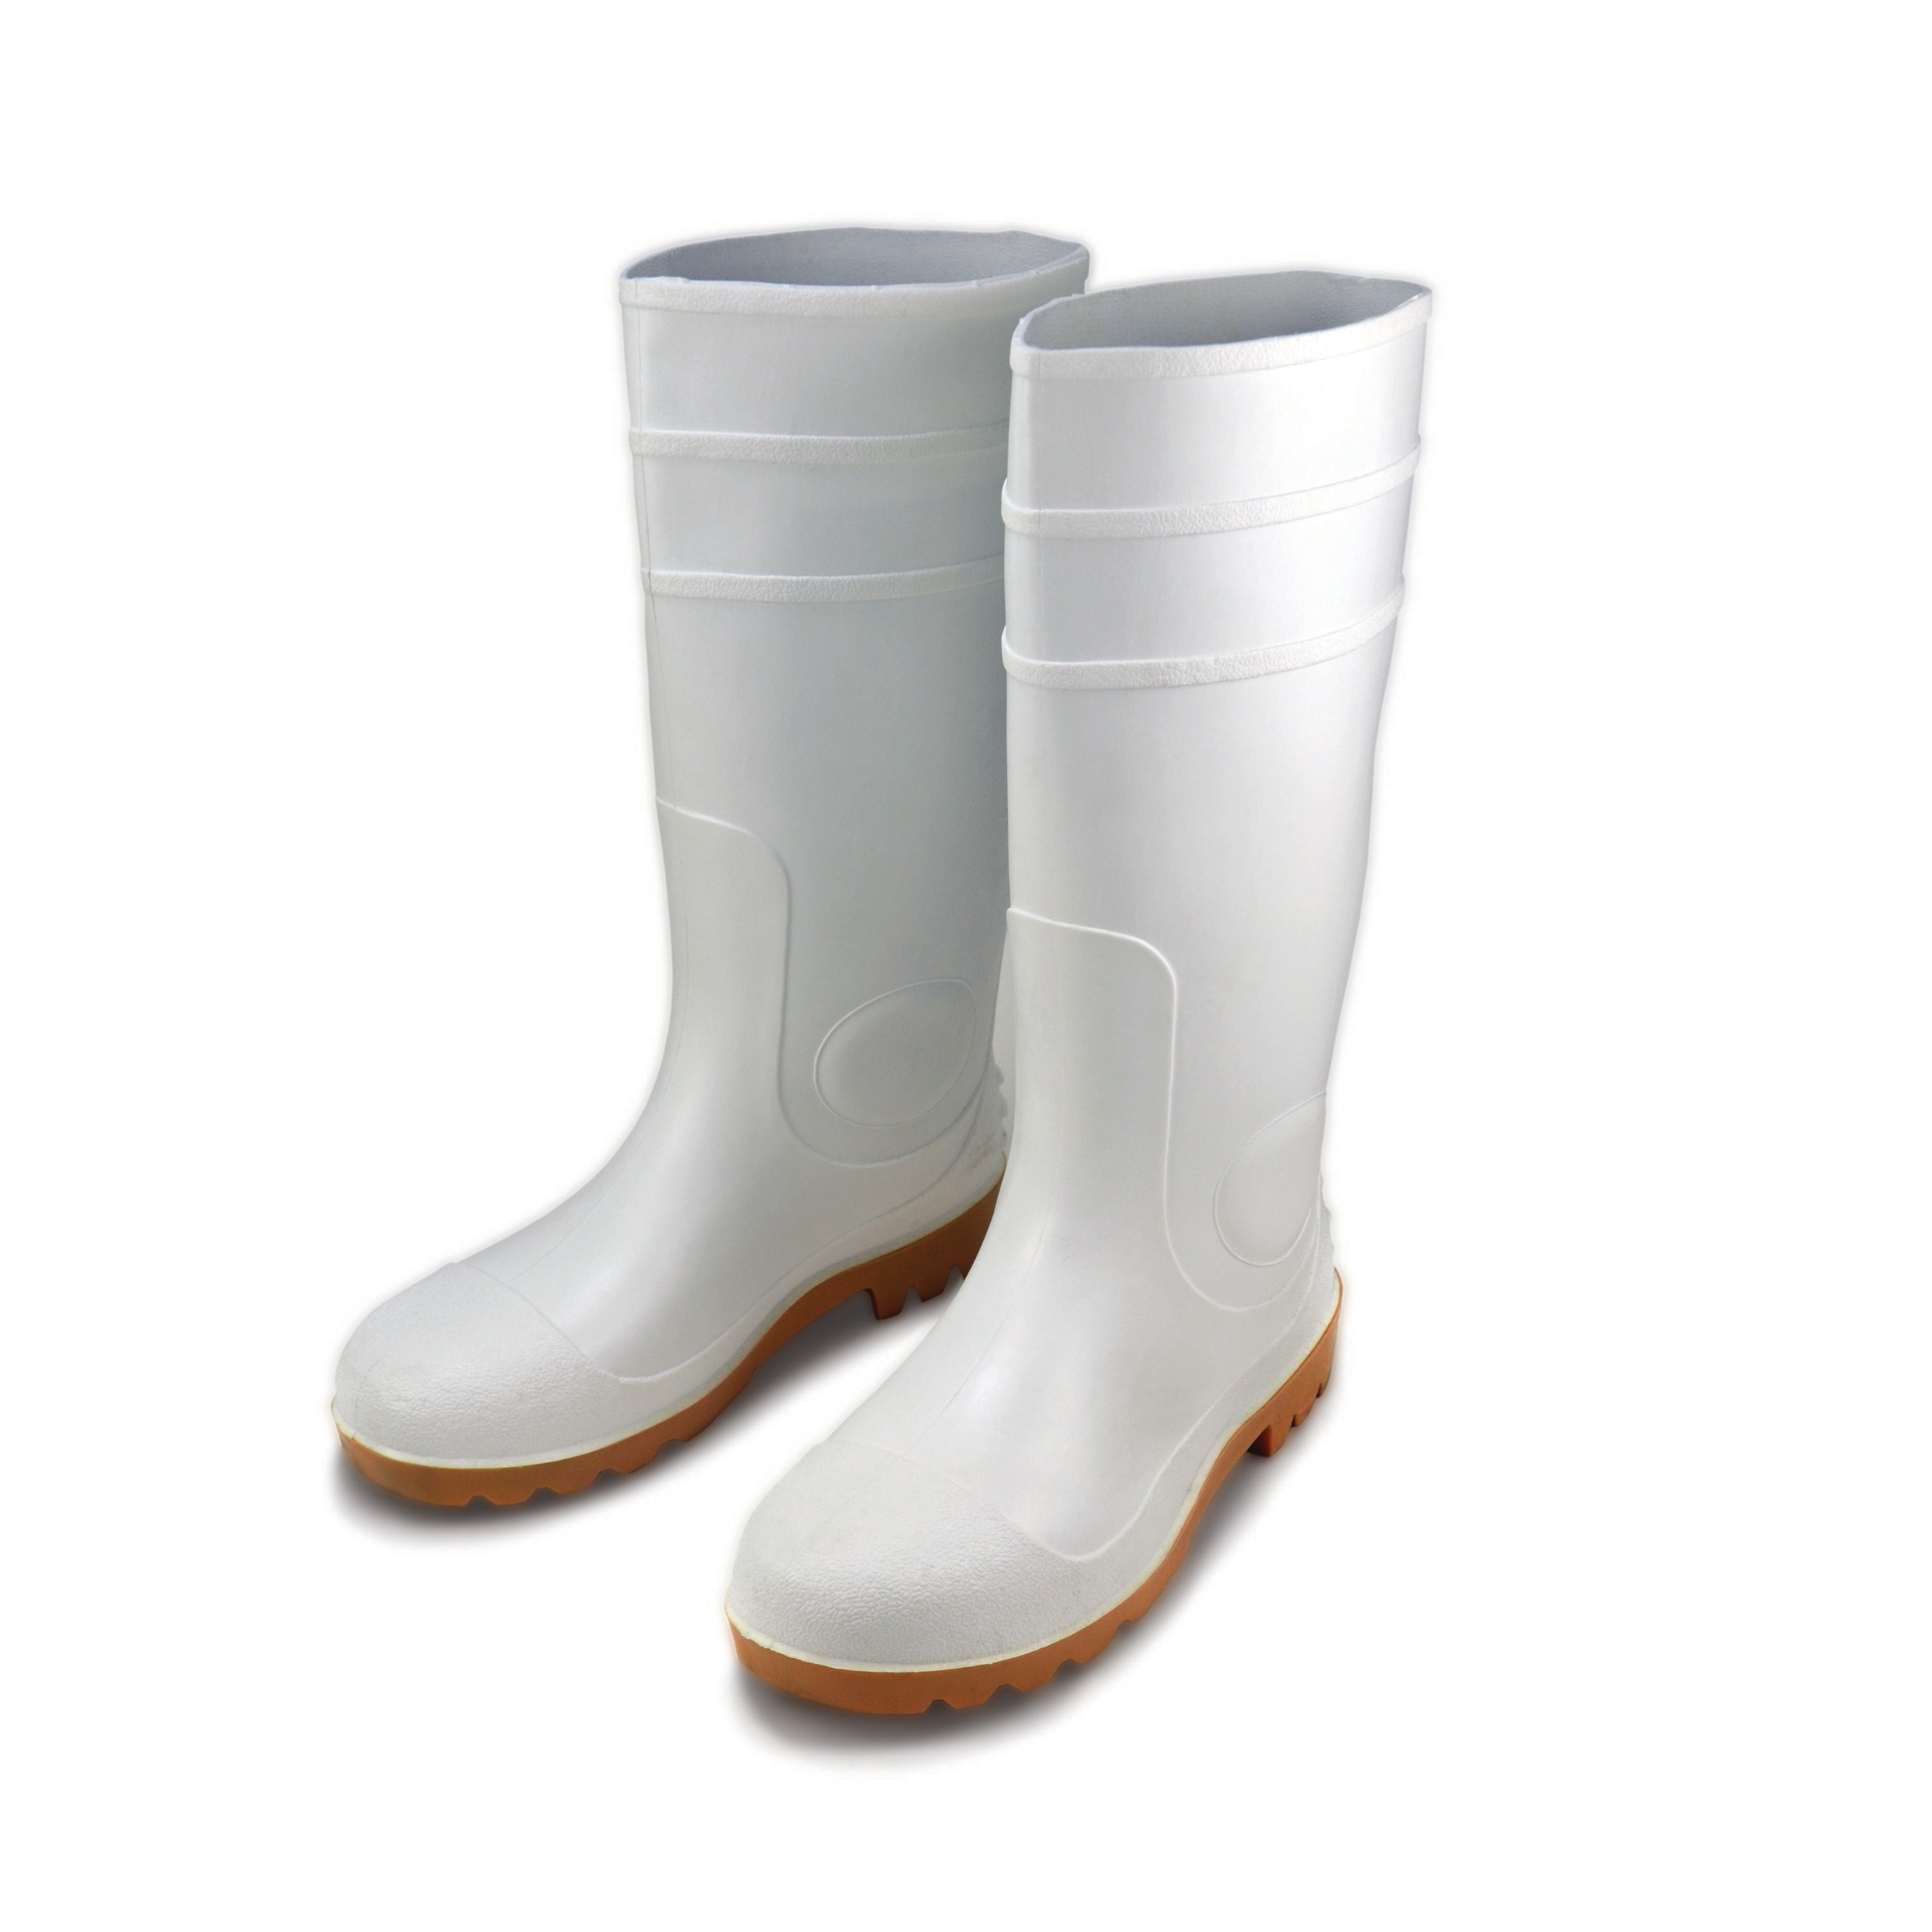 Rubber boots Clothing & Work Apparel at